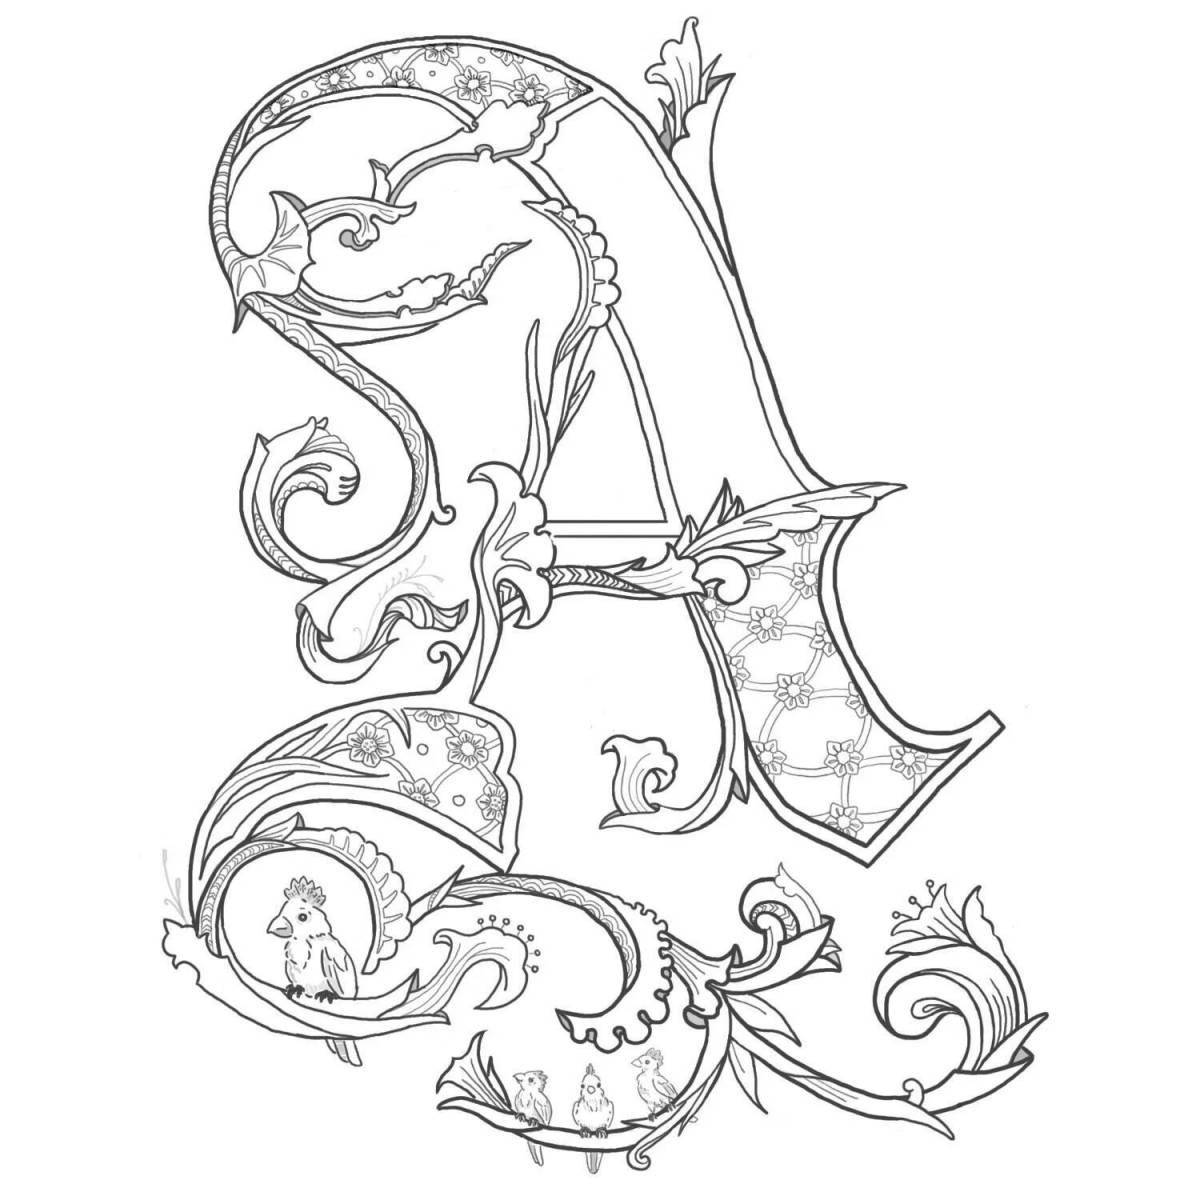 Colorful fantasy coloring book initial letter